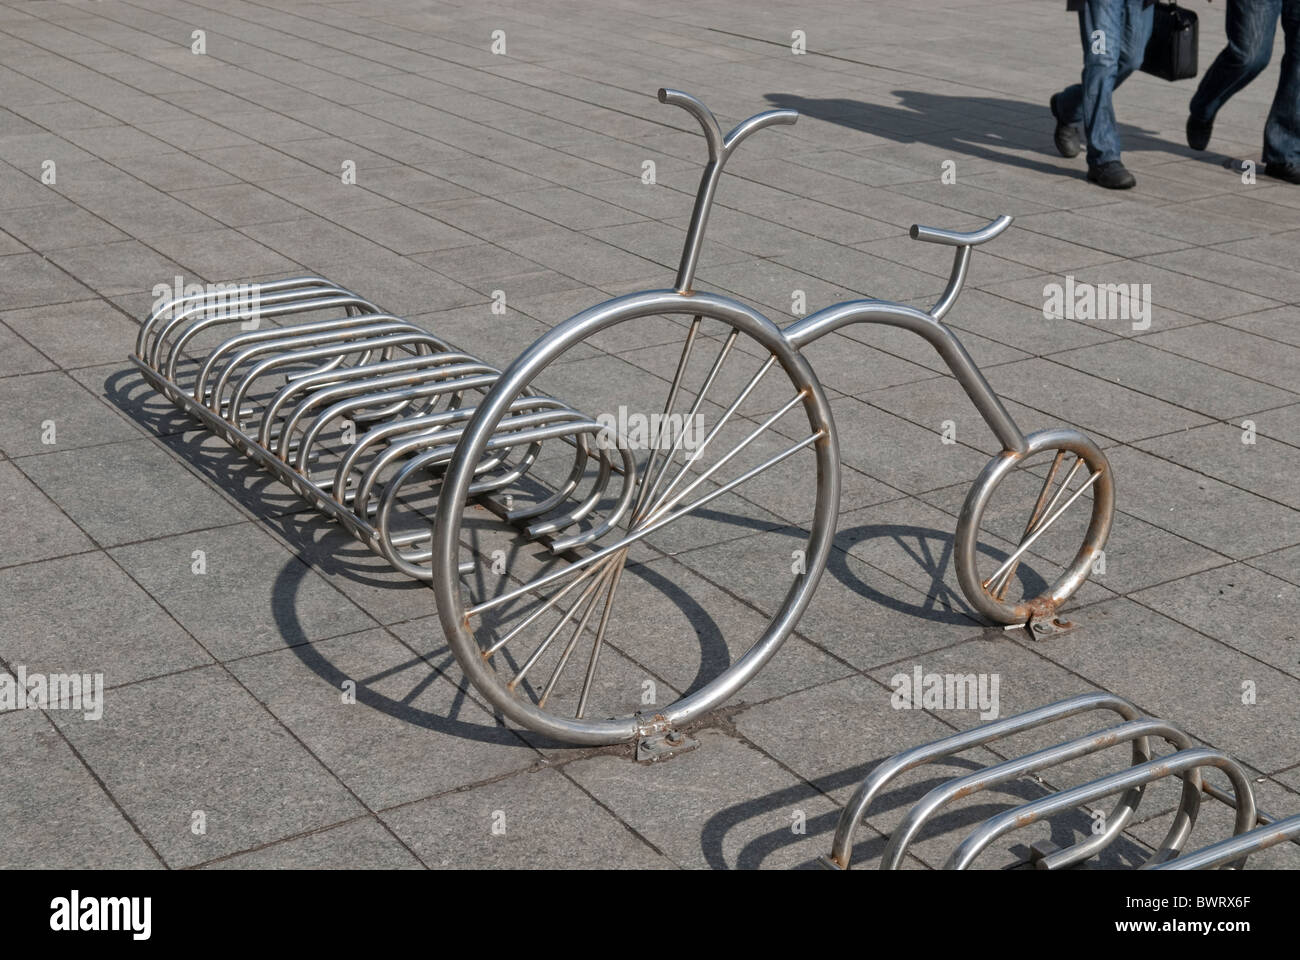 A bicycle stand in Moscow, Russia Stock Photo